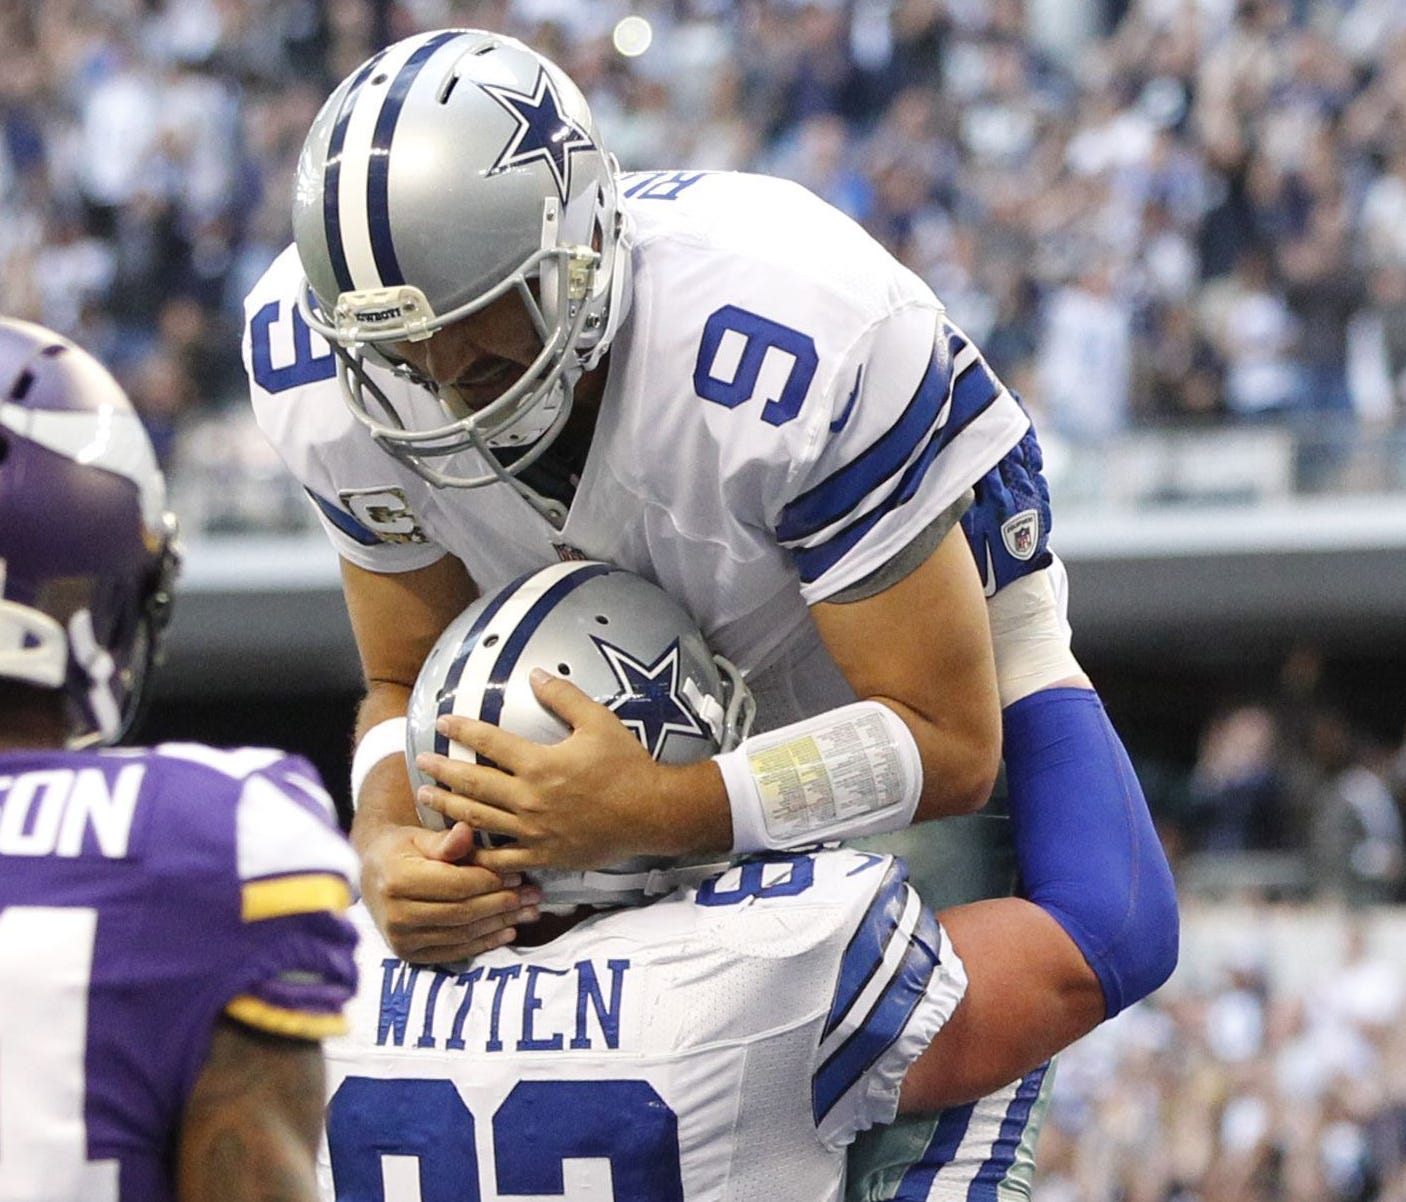 Former Dallas Cowboys quarterback Tony Romo (9) jumps in the arms of former tight end Jason Witten (82) during a game in 2013.